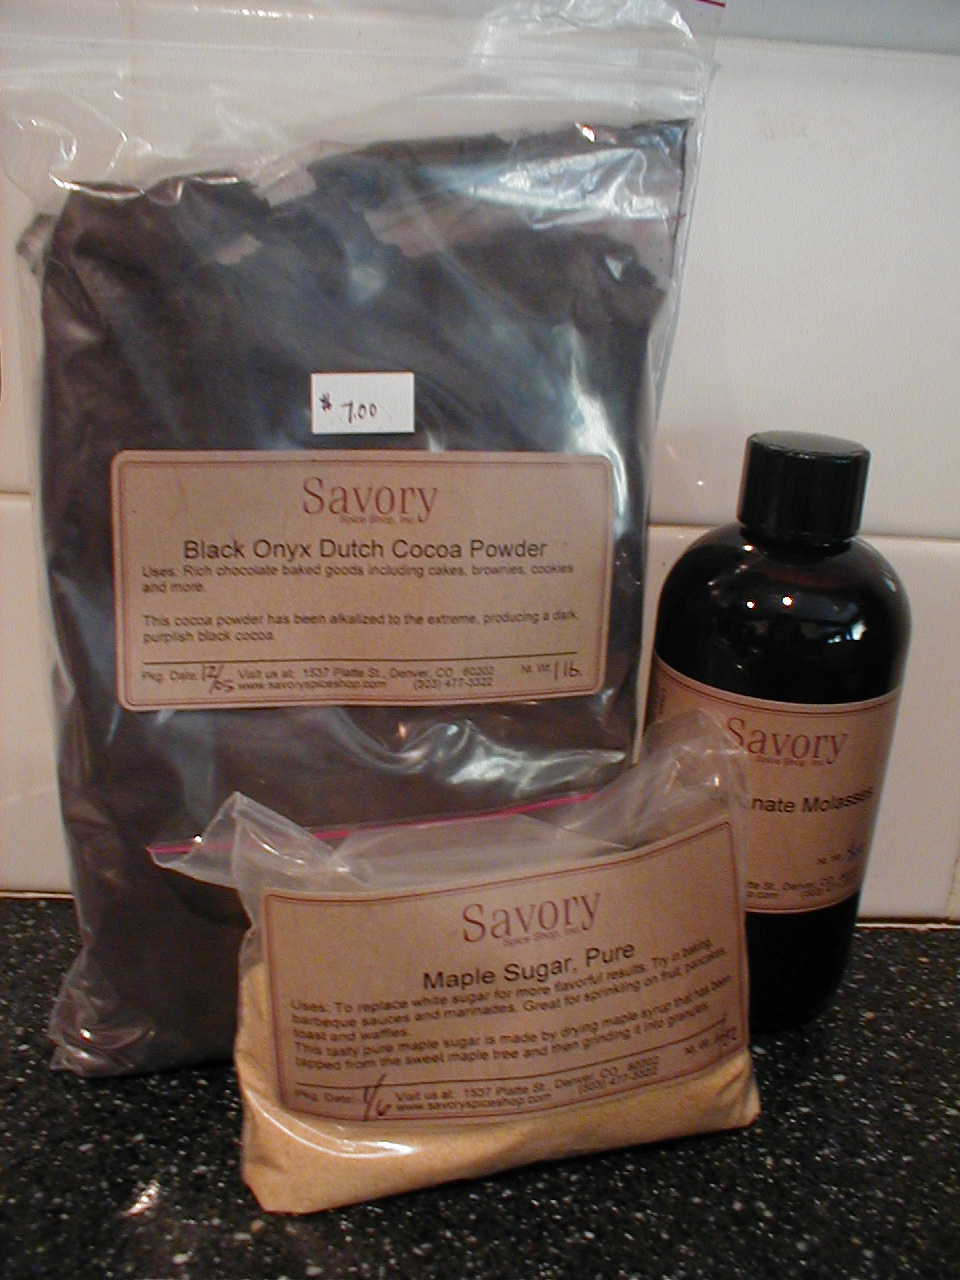 three items labeled savoy with two black bottles